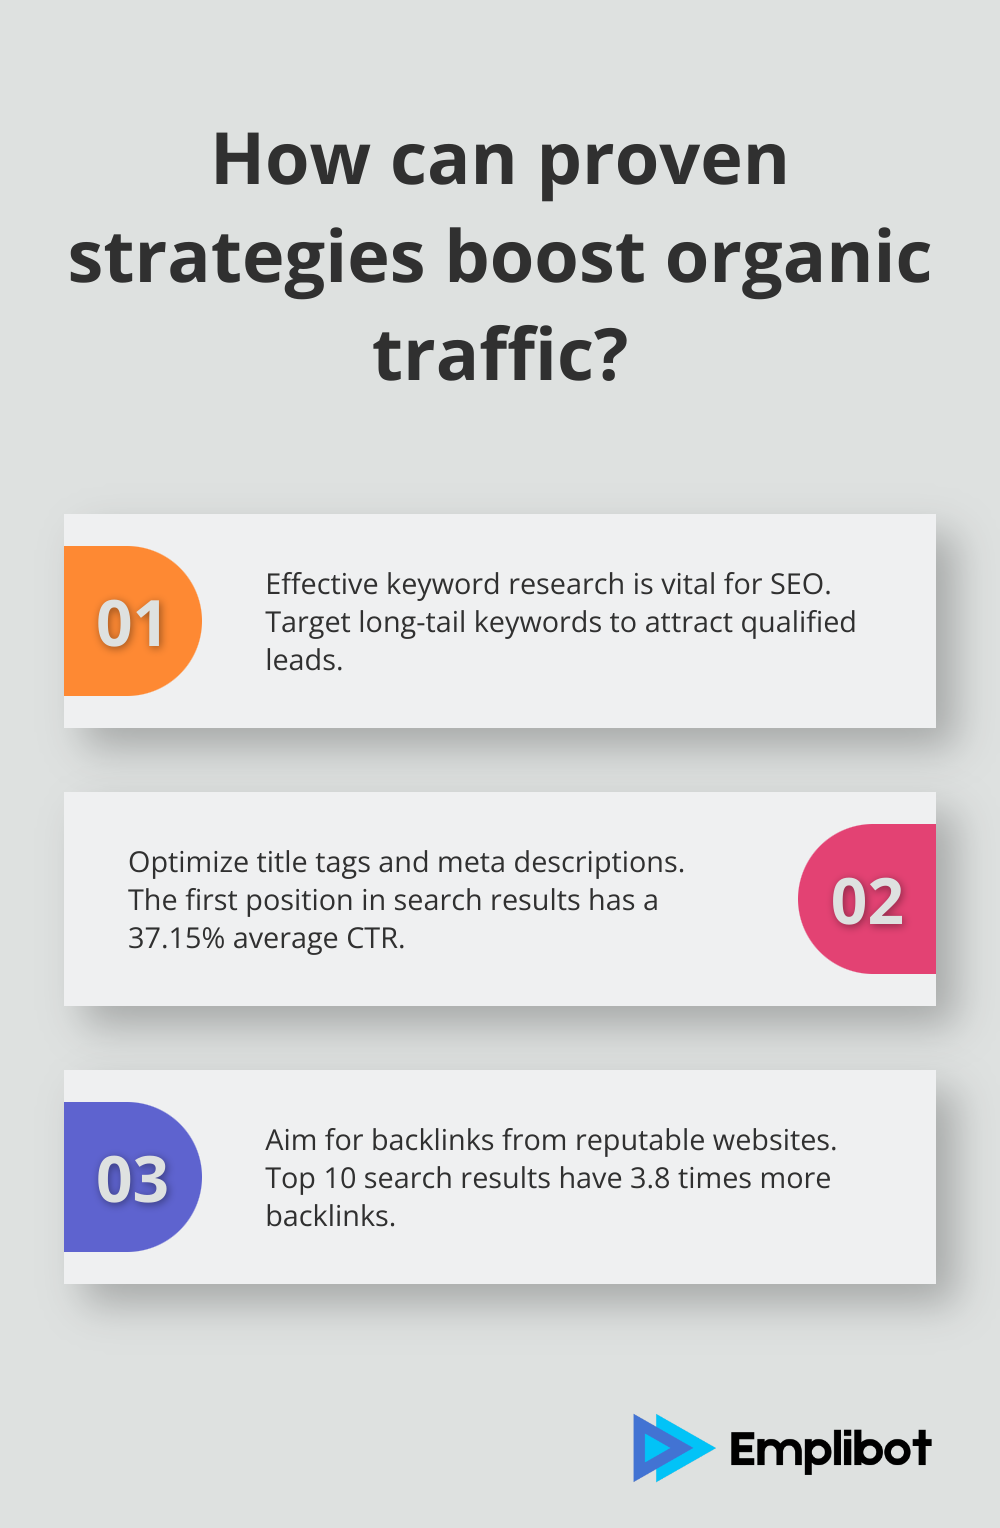 Fact - How can proven strategies boost organic traffic?